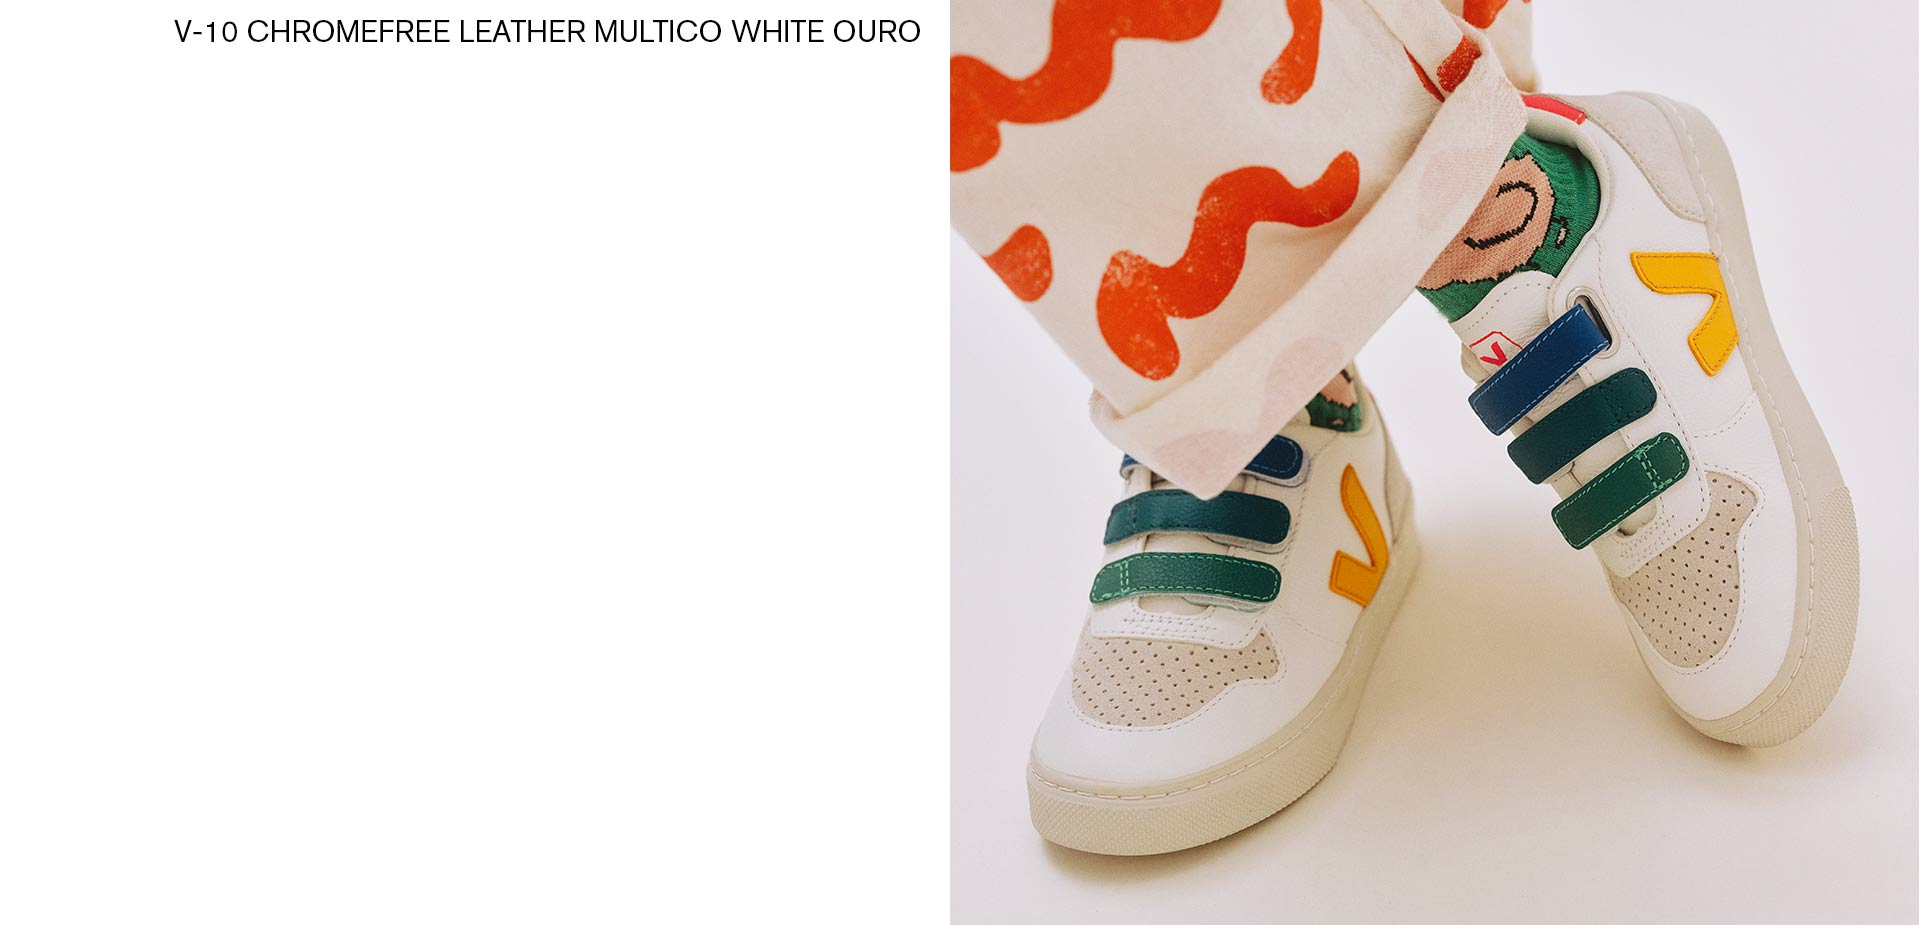 Focus on the feet of a child wearing V-10 chromefree multico white multico ouro sneakers